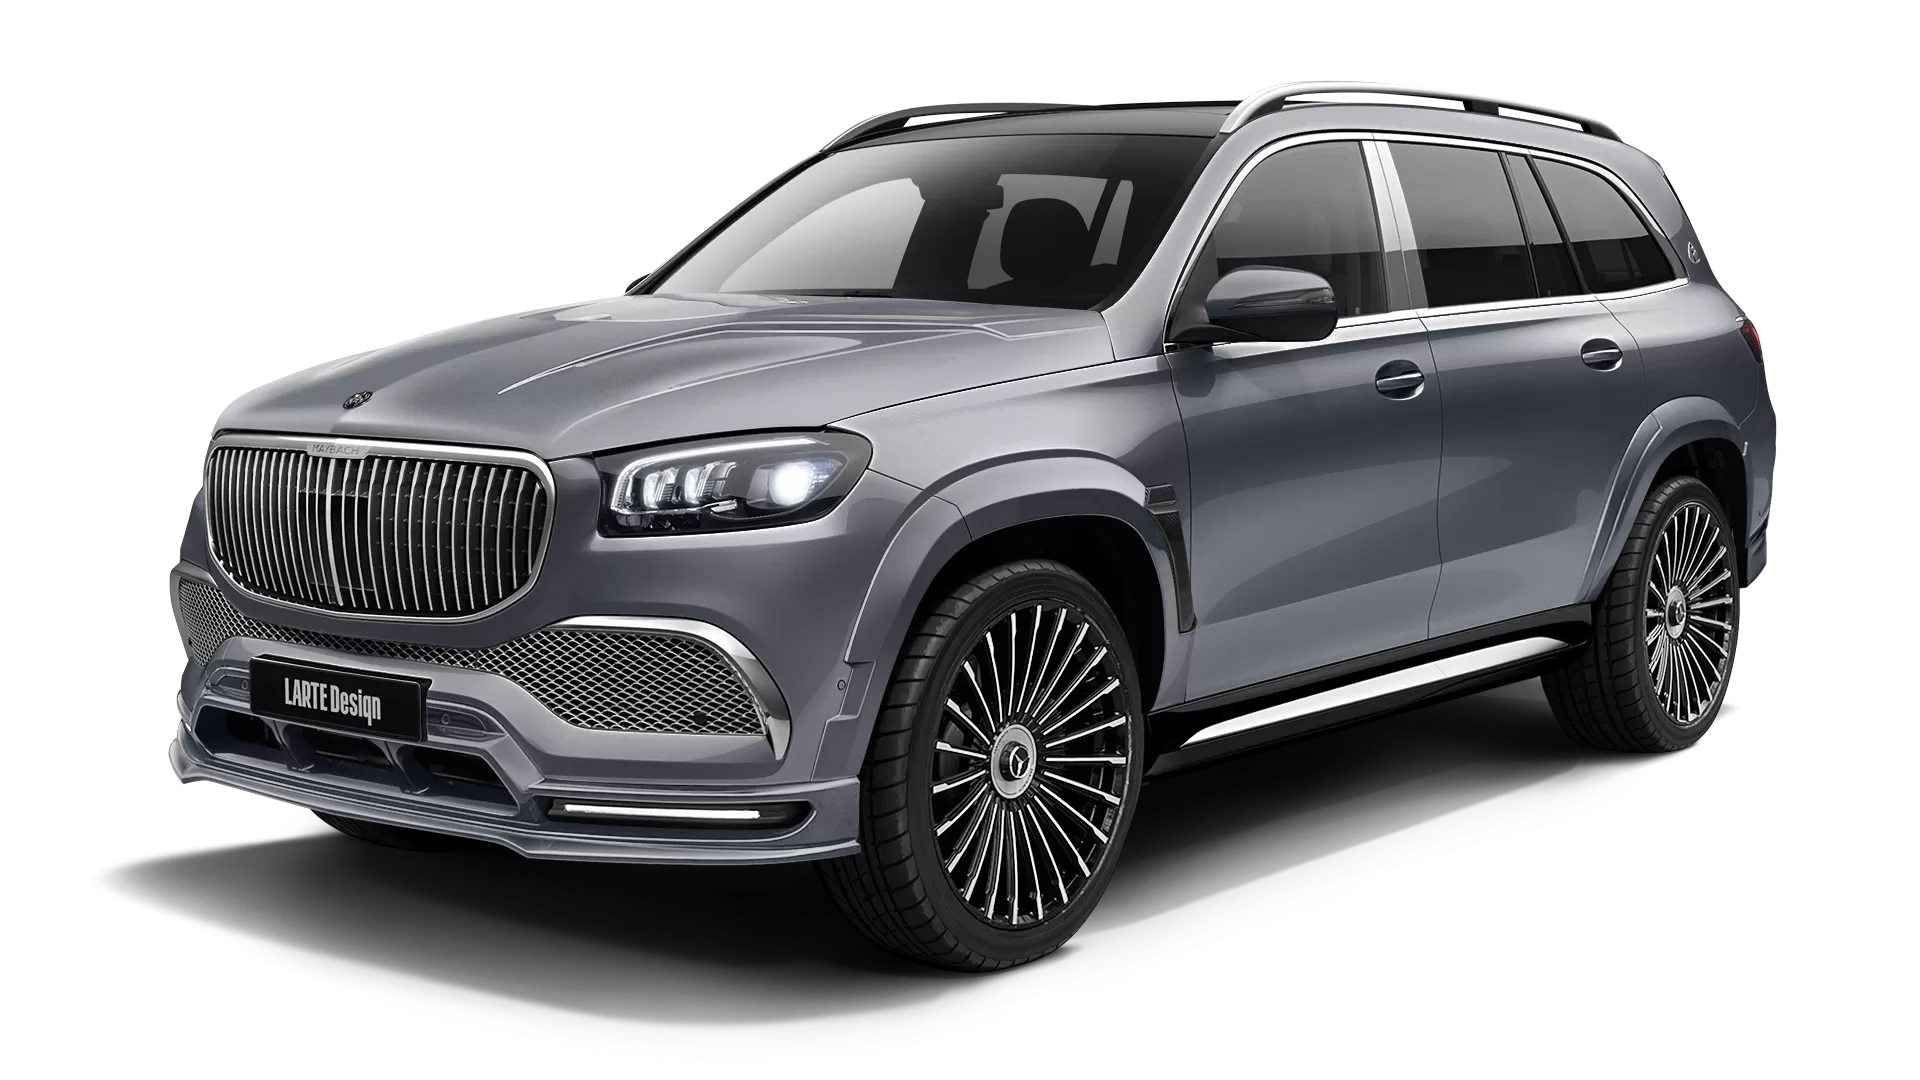 Mercedes Maybach GLS 600 with painted body kit: front view shown in Selenite Grey